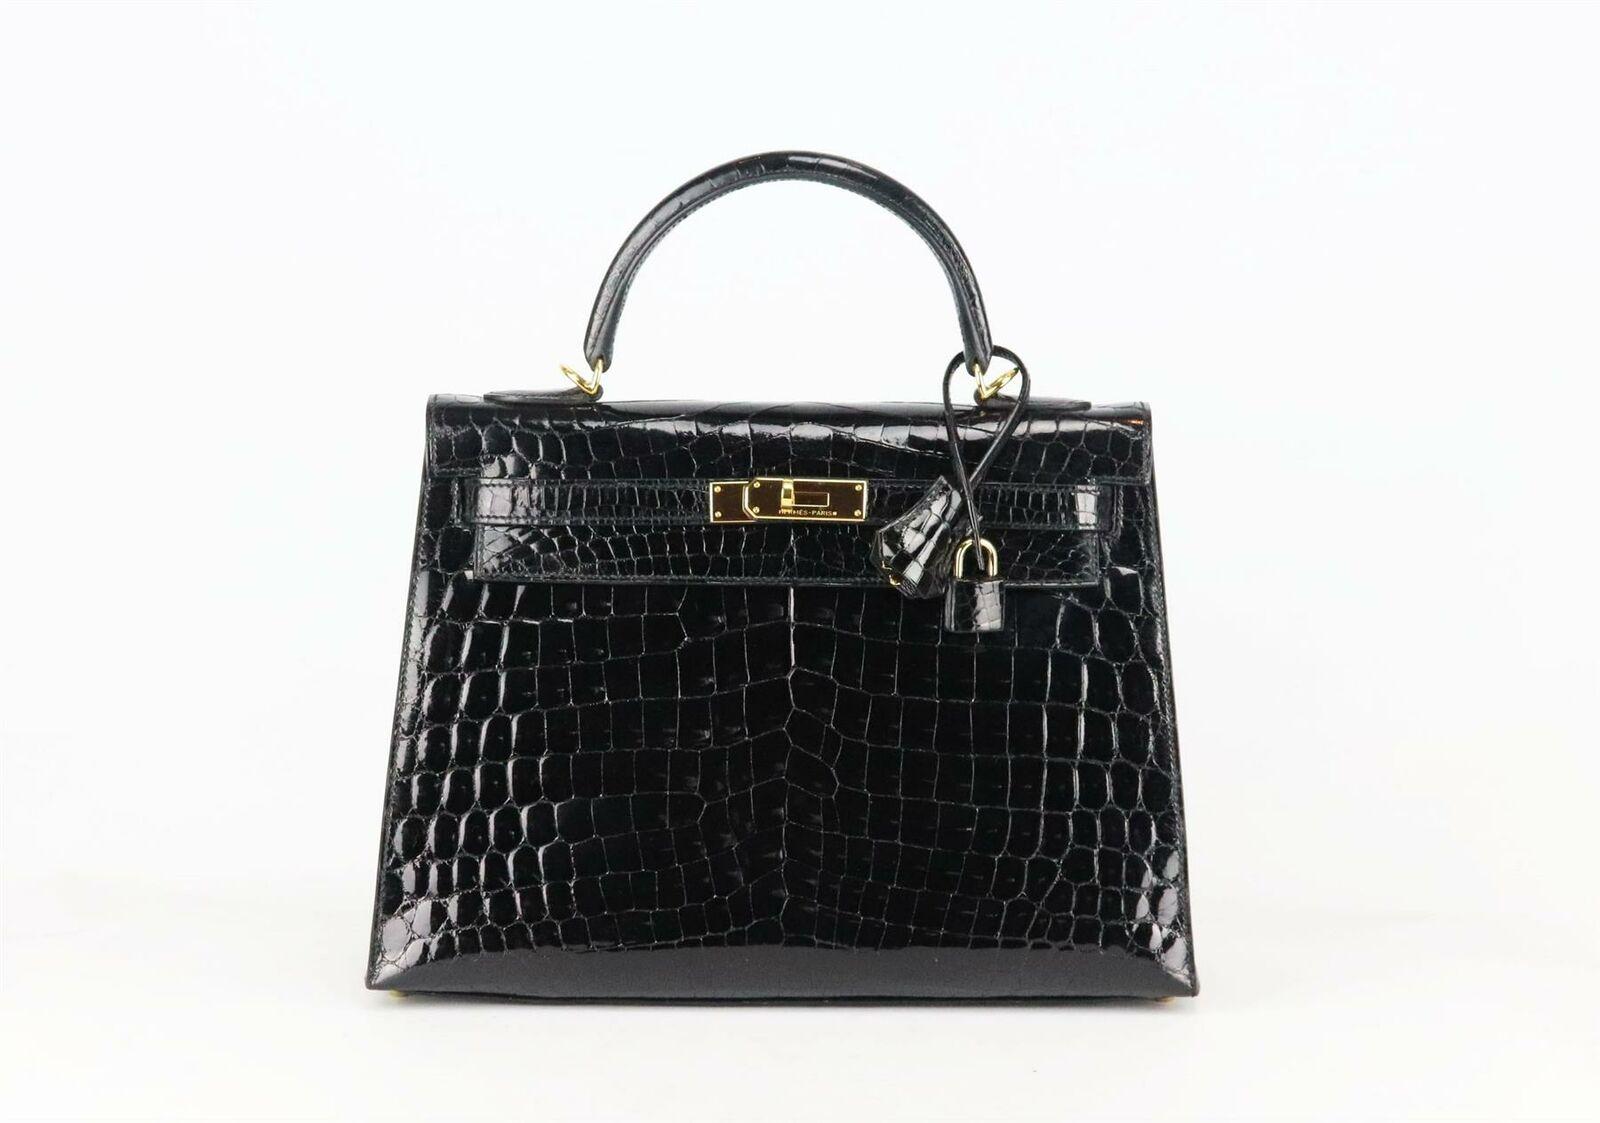 Made in France, this beautiful 2014 Hermès ‘Kelly Sellier’ 32cm handbag has been made from shiny Porosus Crocodile exterior in black and matching leather interior, this piece is decorated with gold hardware on the front and finished with top handle